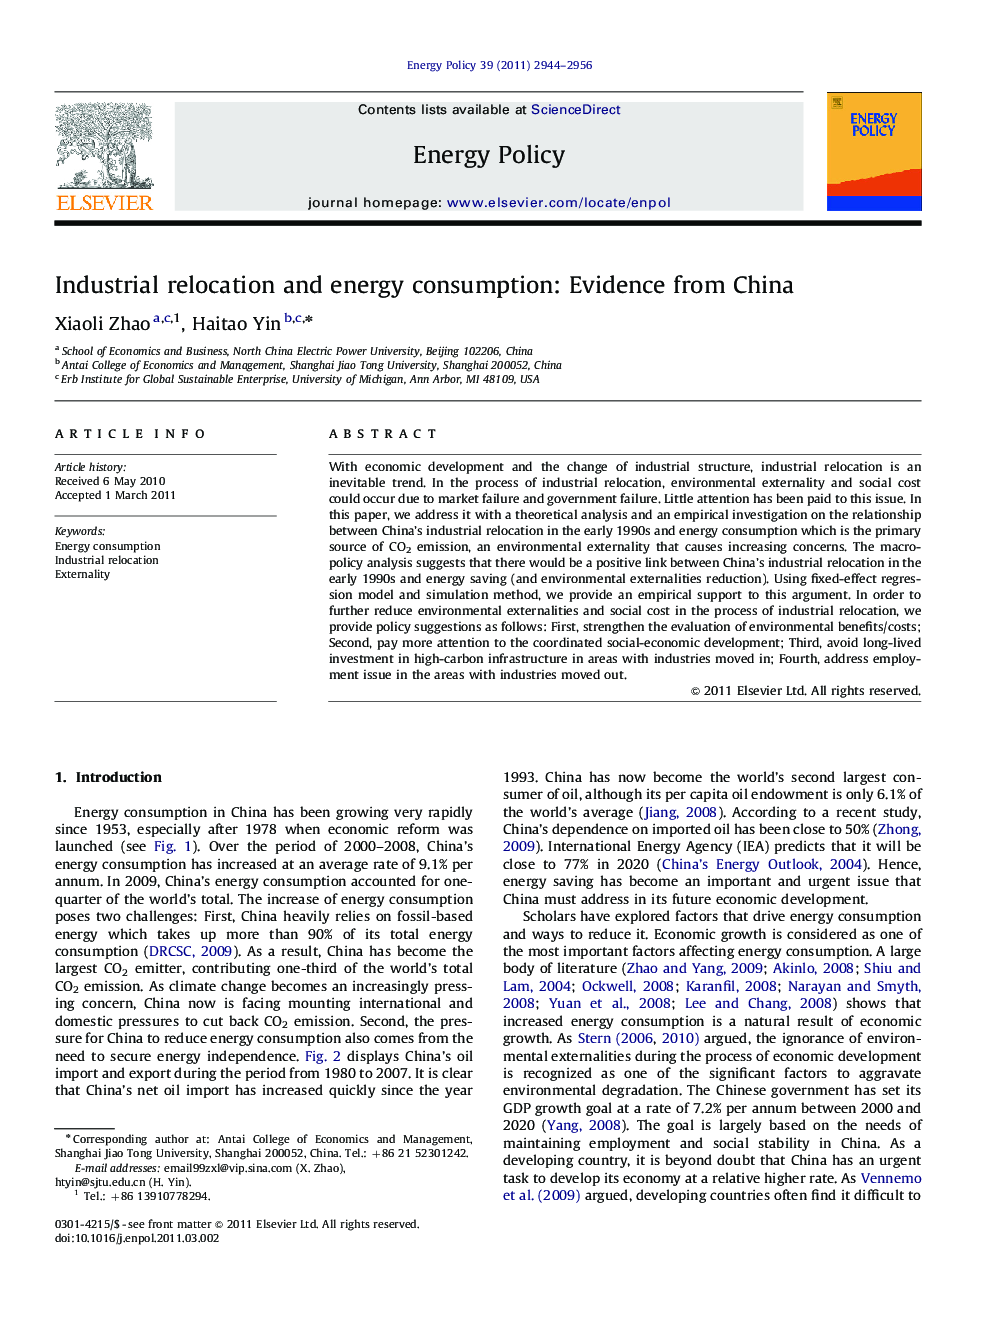 Industrial relocation and energy consumption: Evidence from China